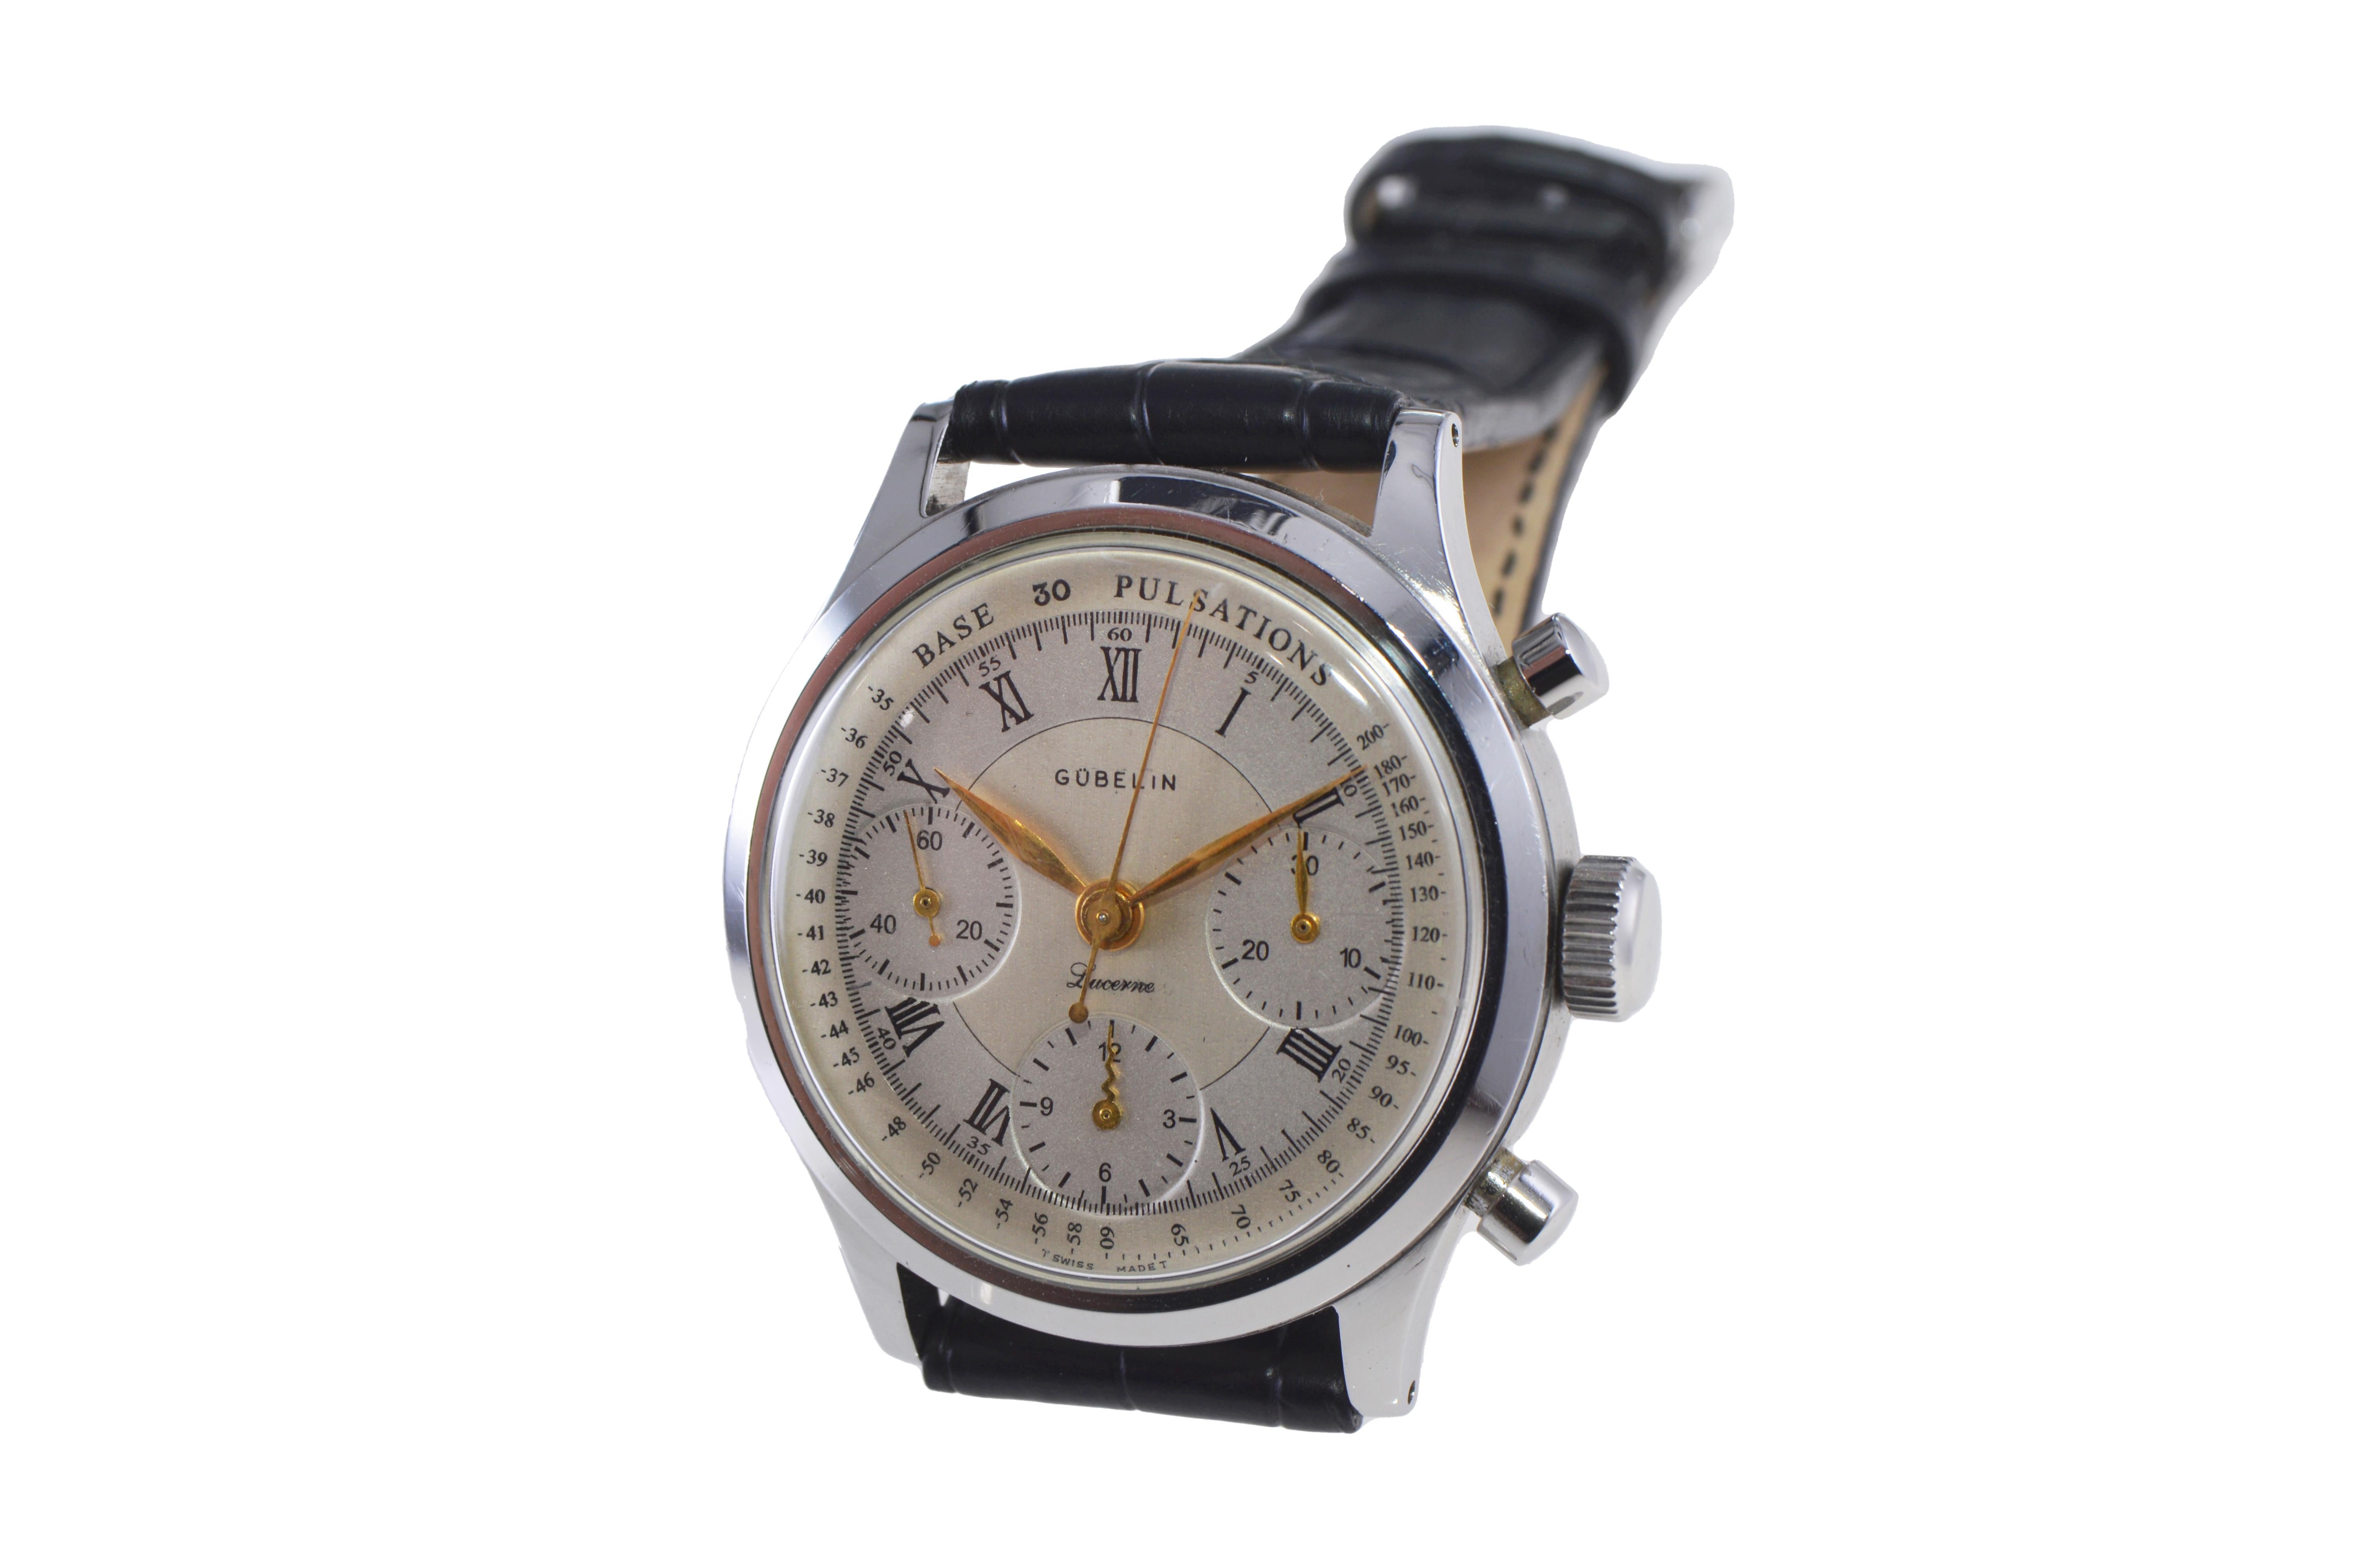 Gubelin Stainless Steel Valjoux 72 Chronograph Doctors Pulsation Watch, 1940s For Sale 2